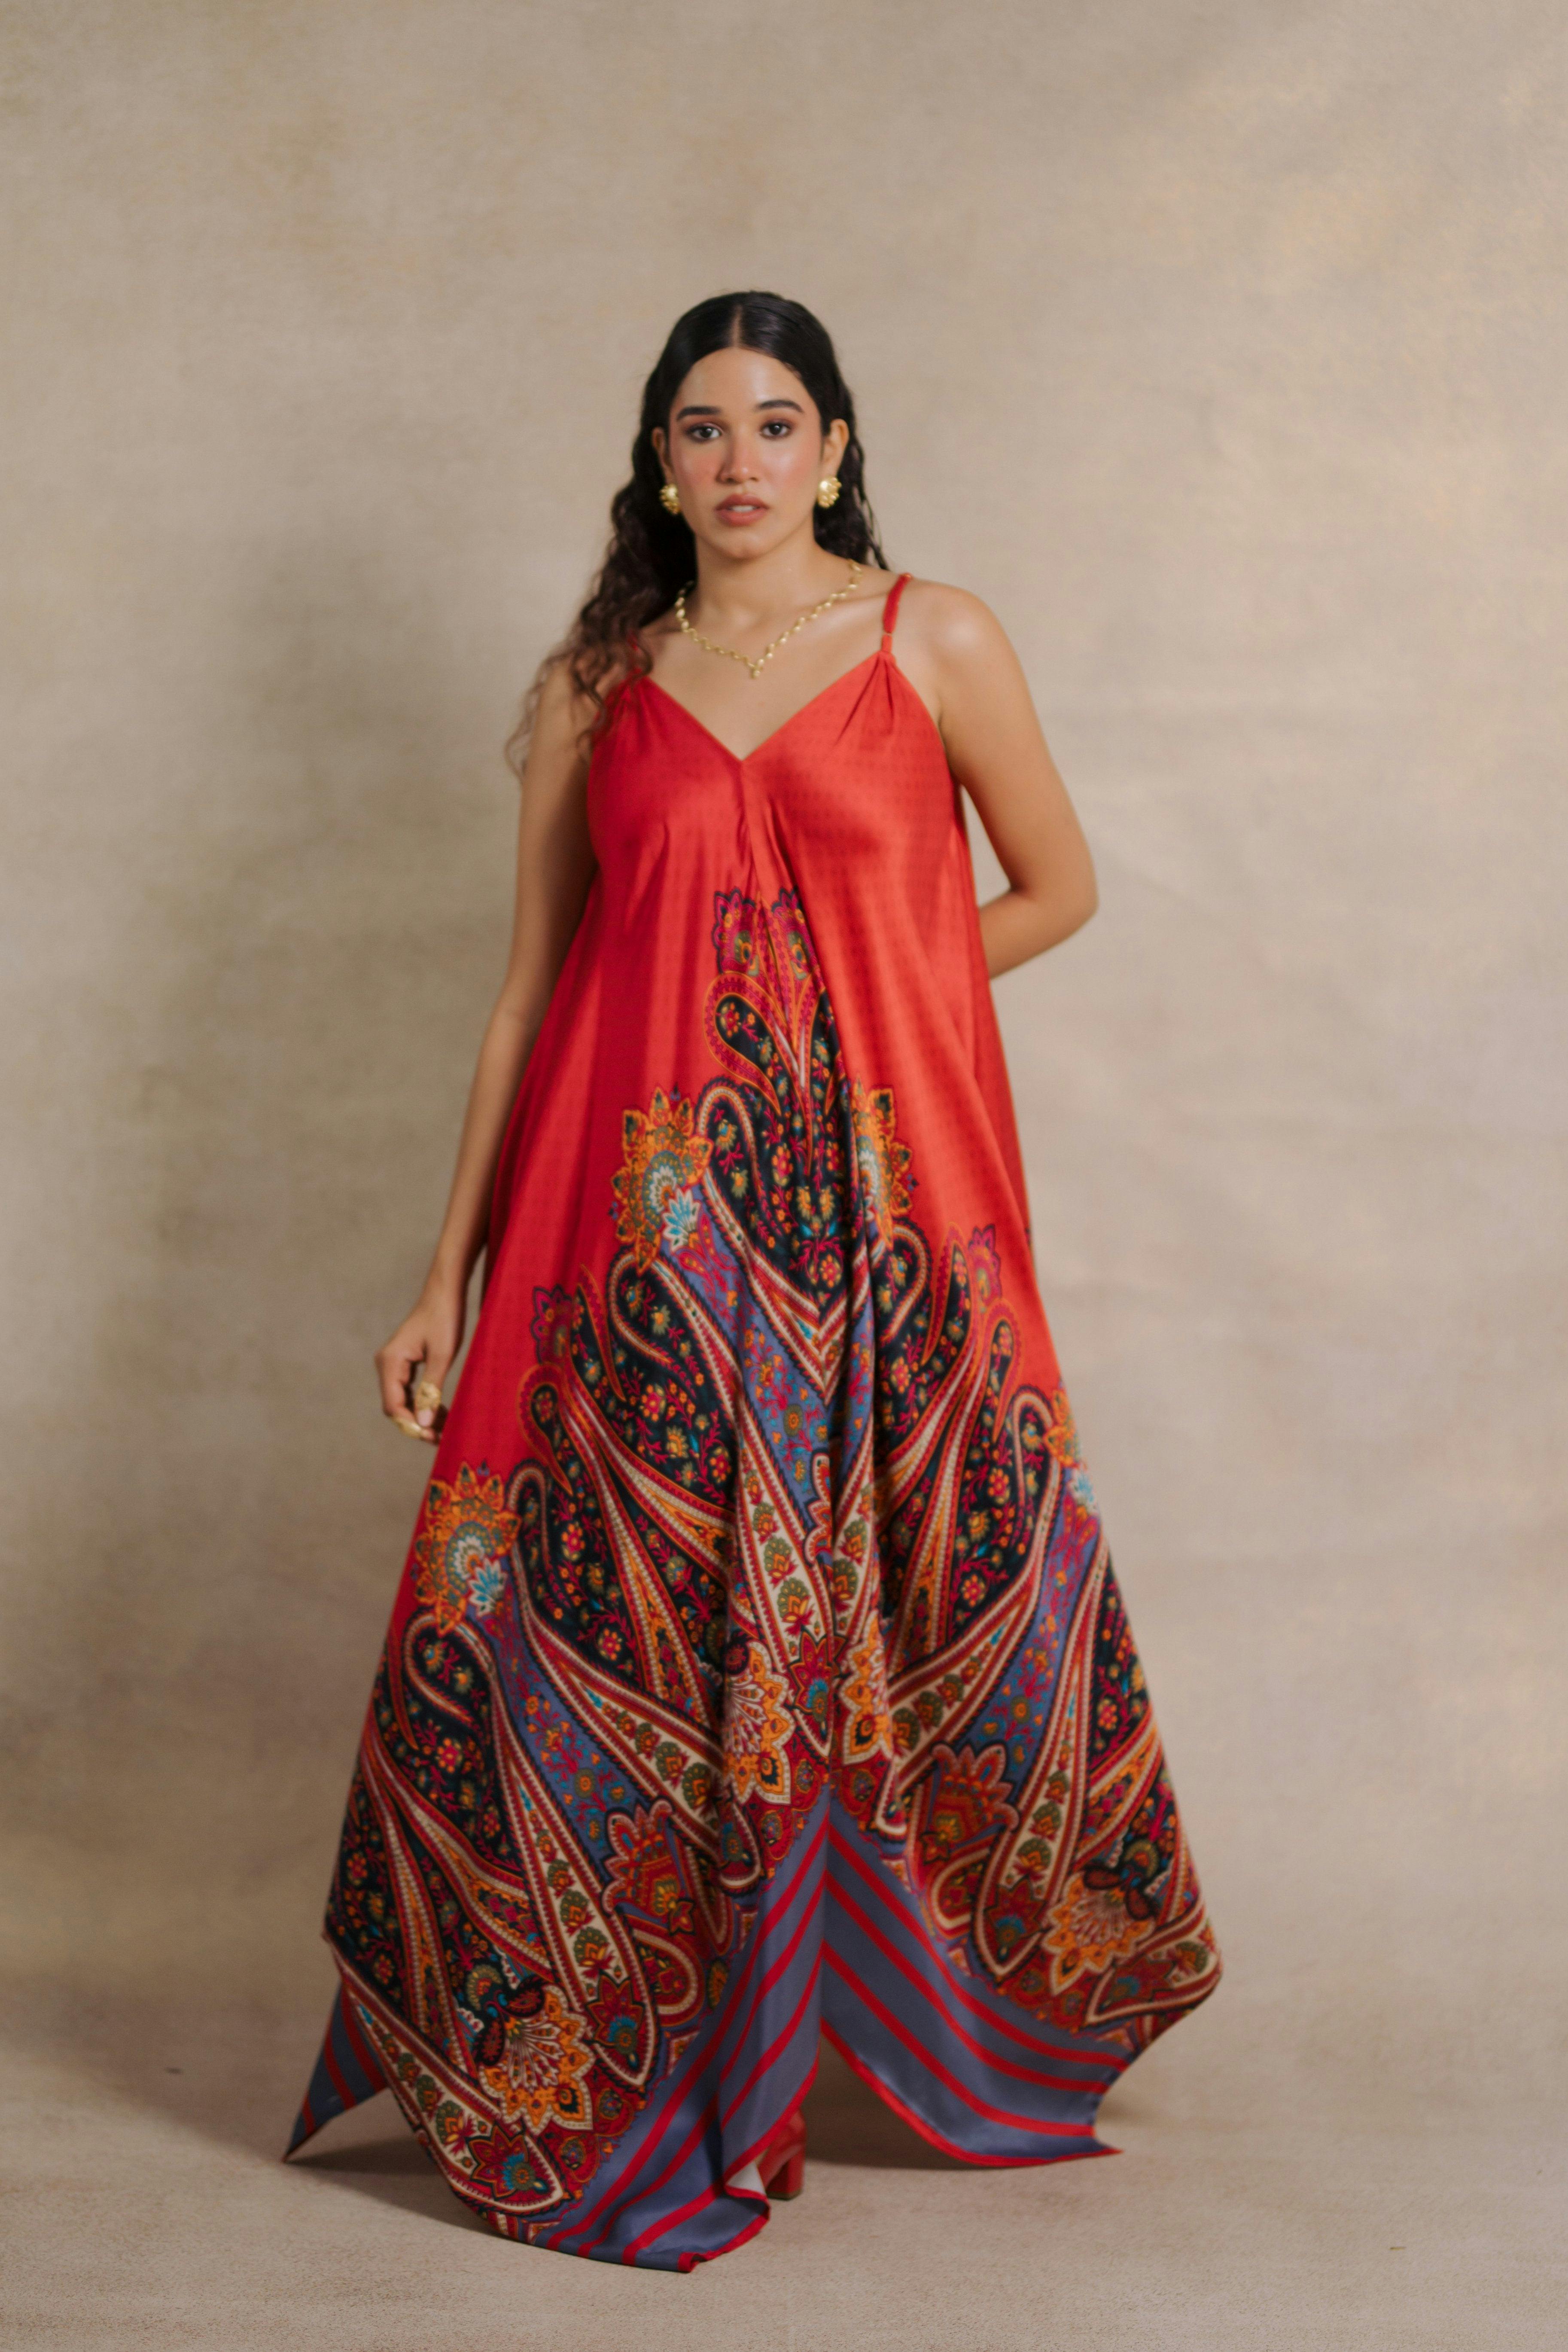 Zaffrani Dress, a product by Moh India